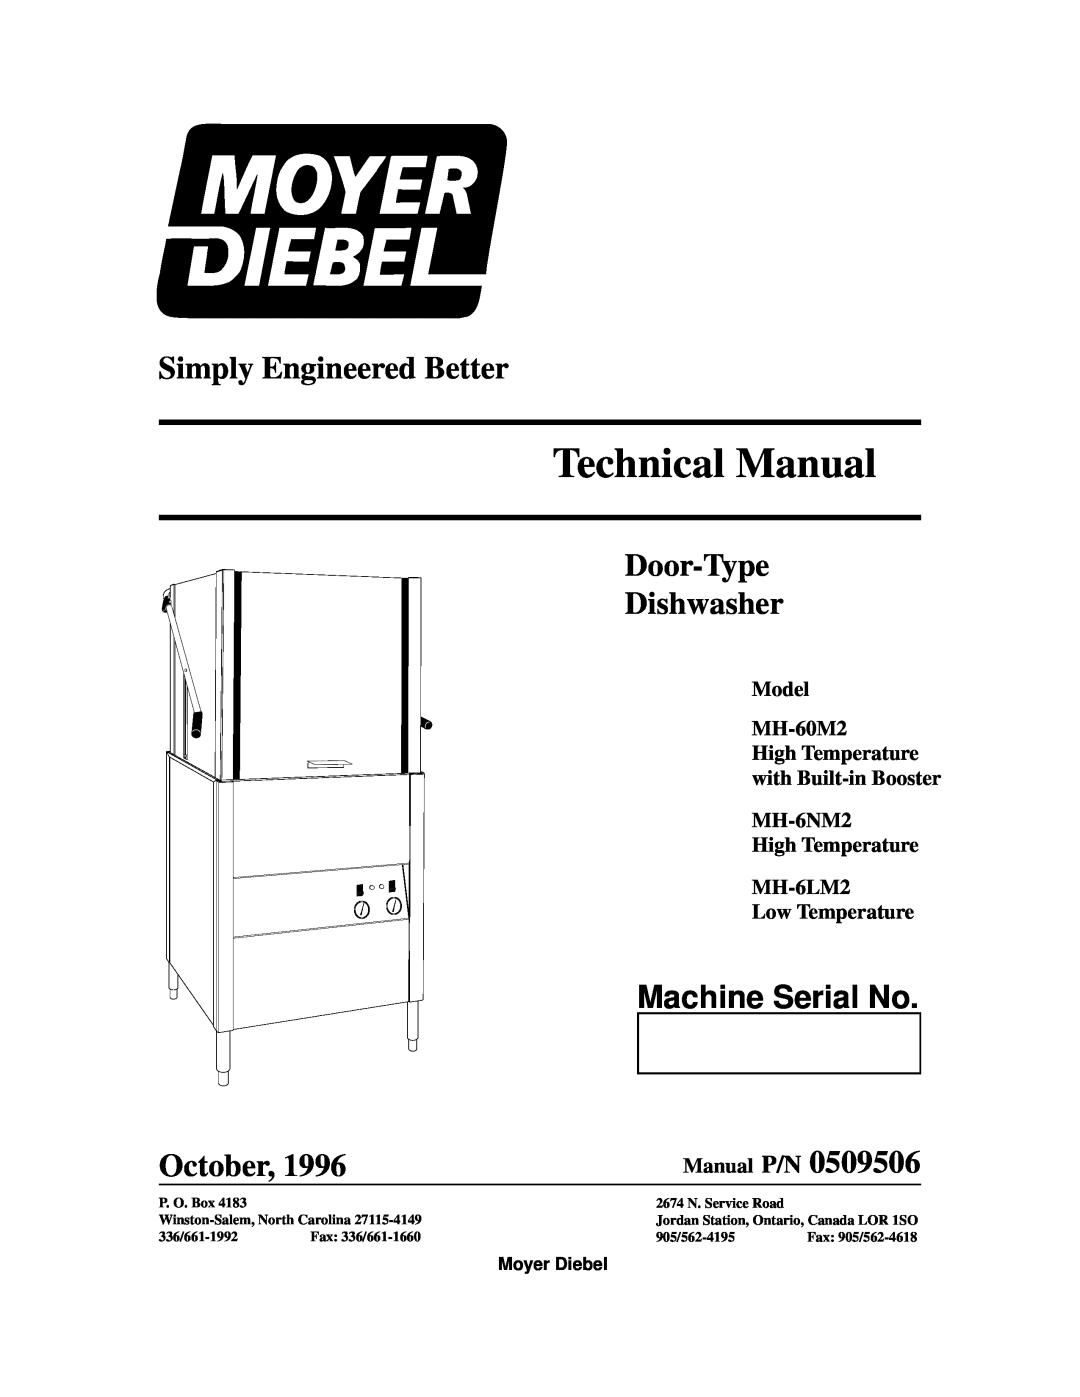 Moyer Diebel MH-60M2, MH-6NM2 technical manual Simply Engineered Better, Door-Type Dishwasher, Machine Serial No, October 